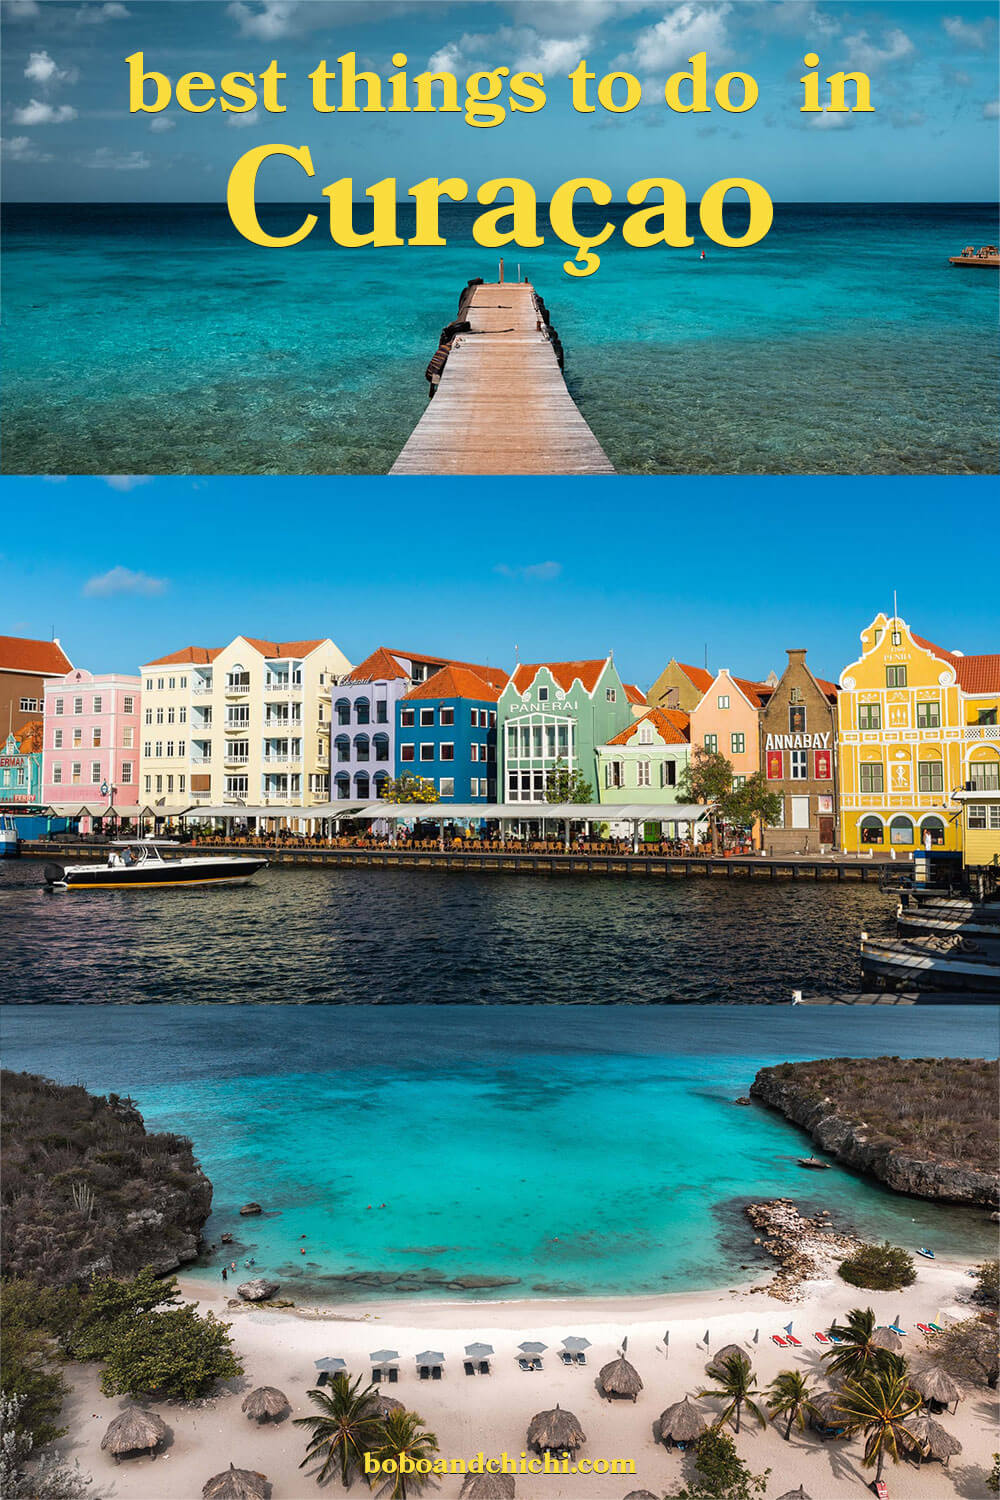 best-things-to-do-in-curacao